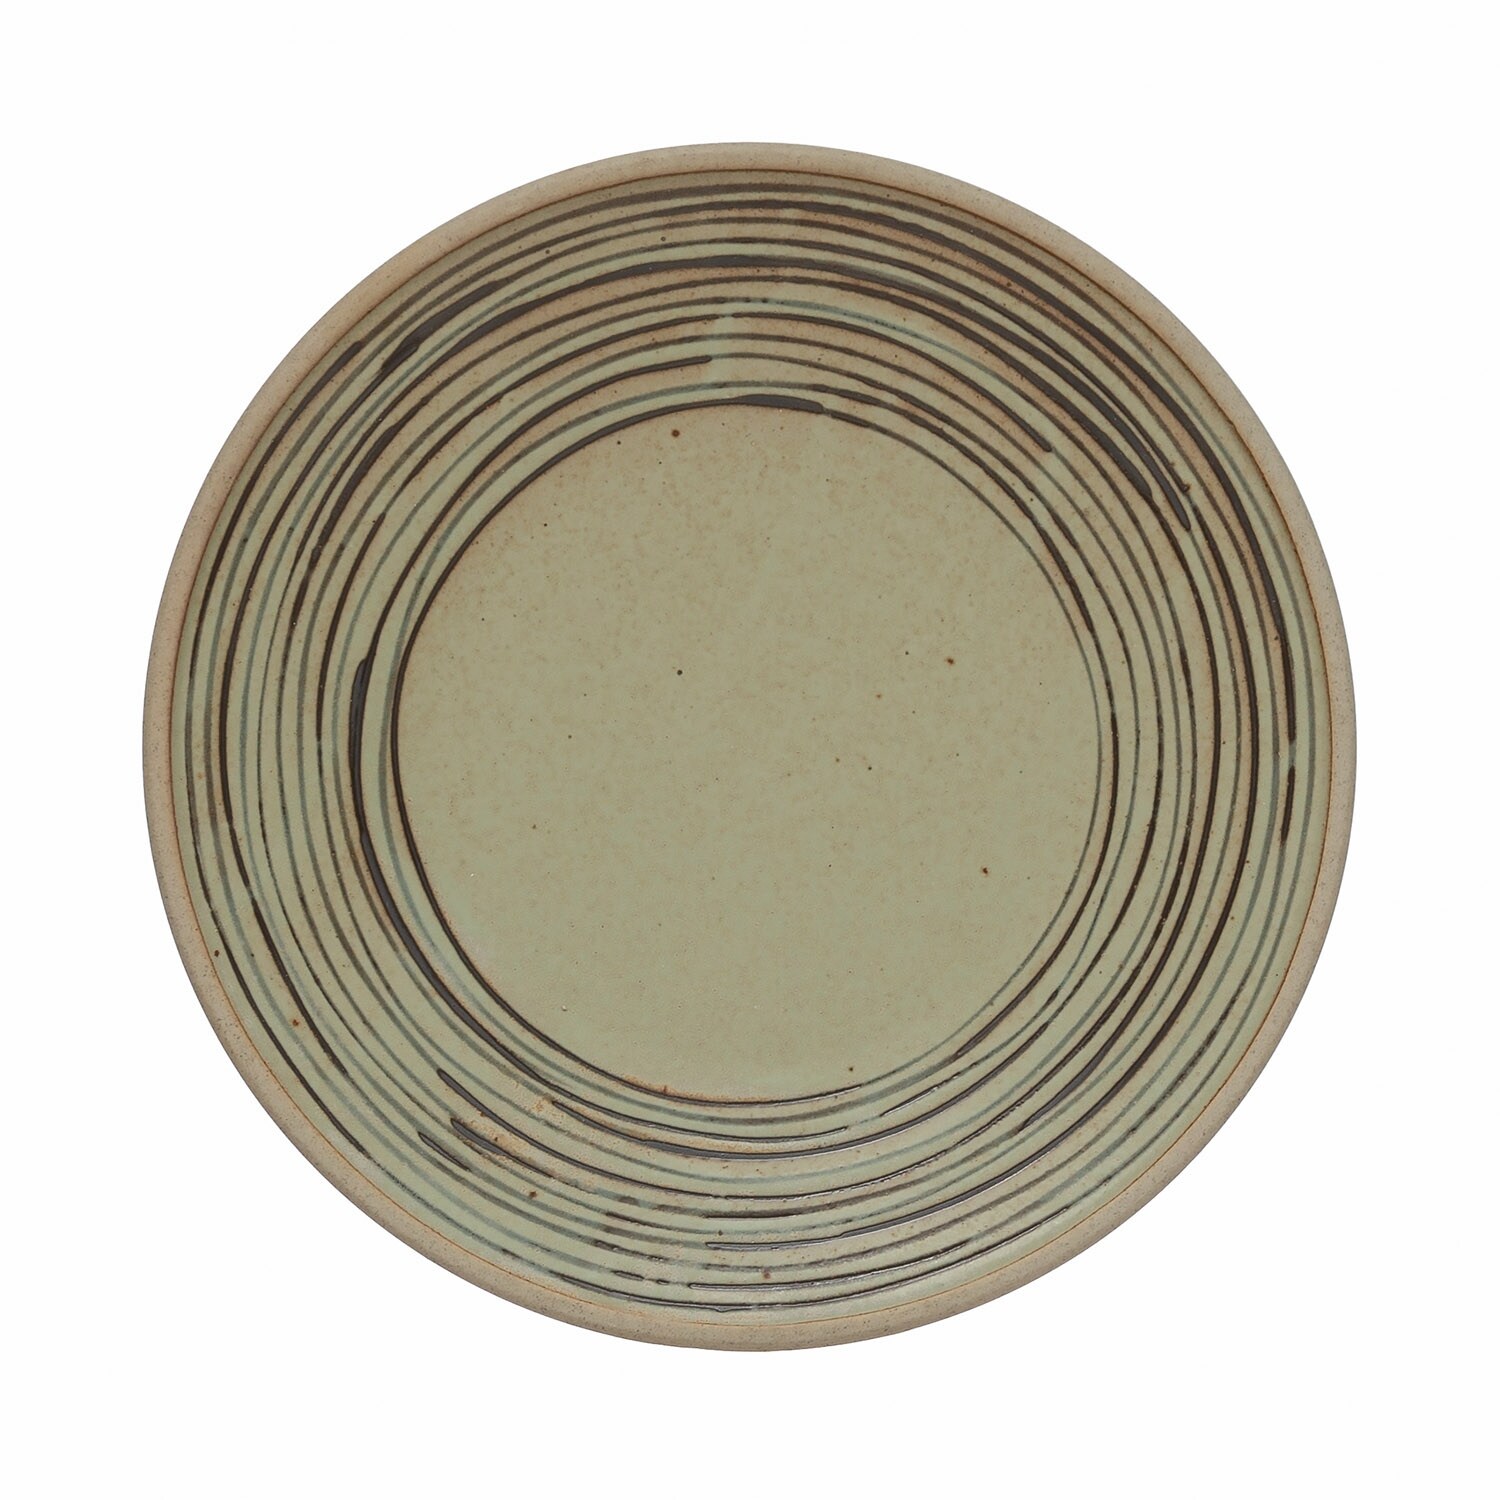 Round Hand-Painted Stoneware Organic Striped Plate, Reactive Glaze, Grey & Black (Each One Will Vary), Set of 2